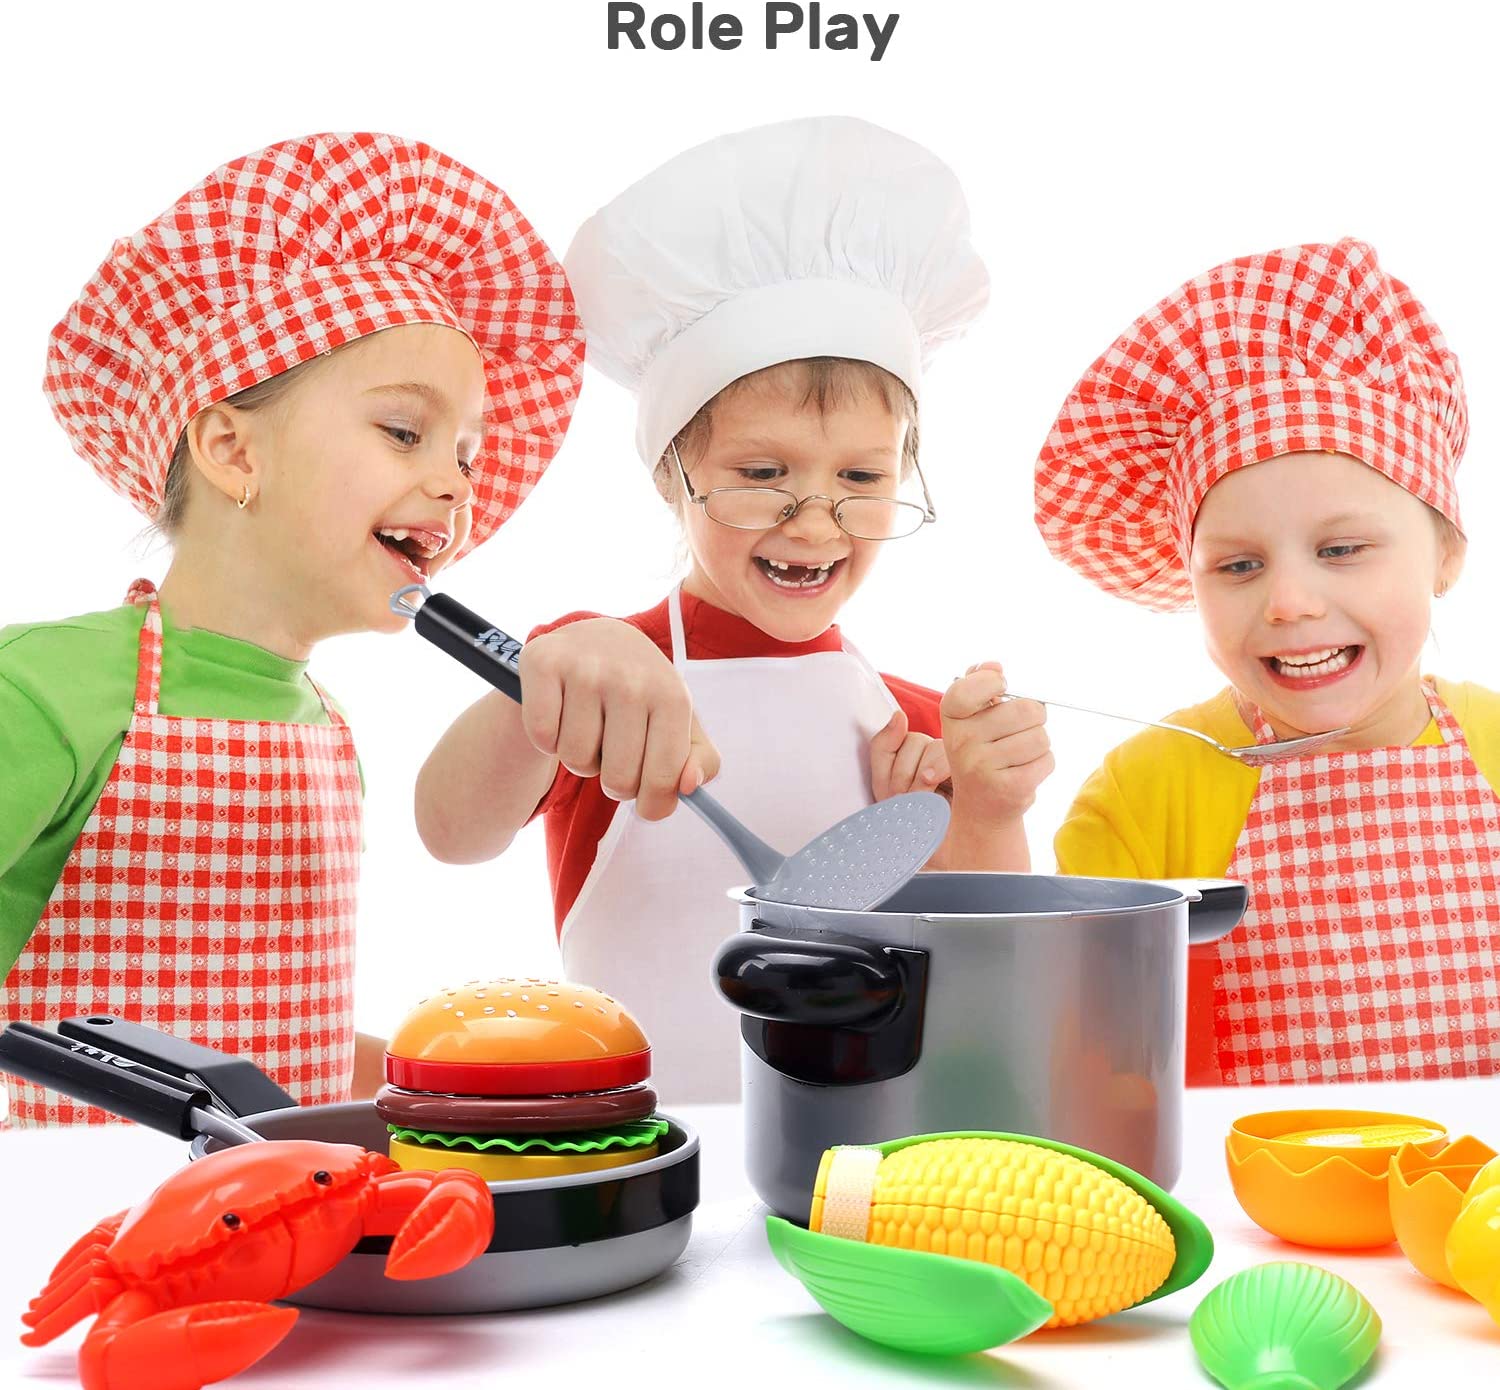 CUTE STONE Kids Kitchen Pretend Play Toy Cooking Set Cookware Pots Pans Playset